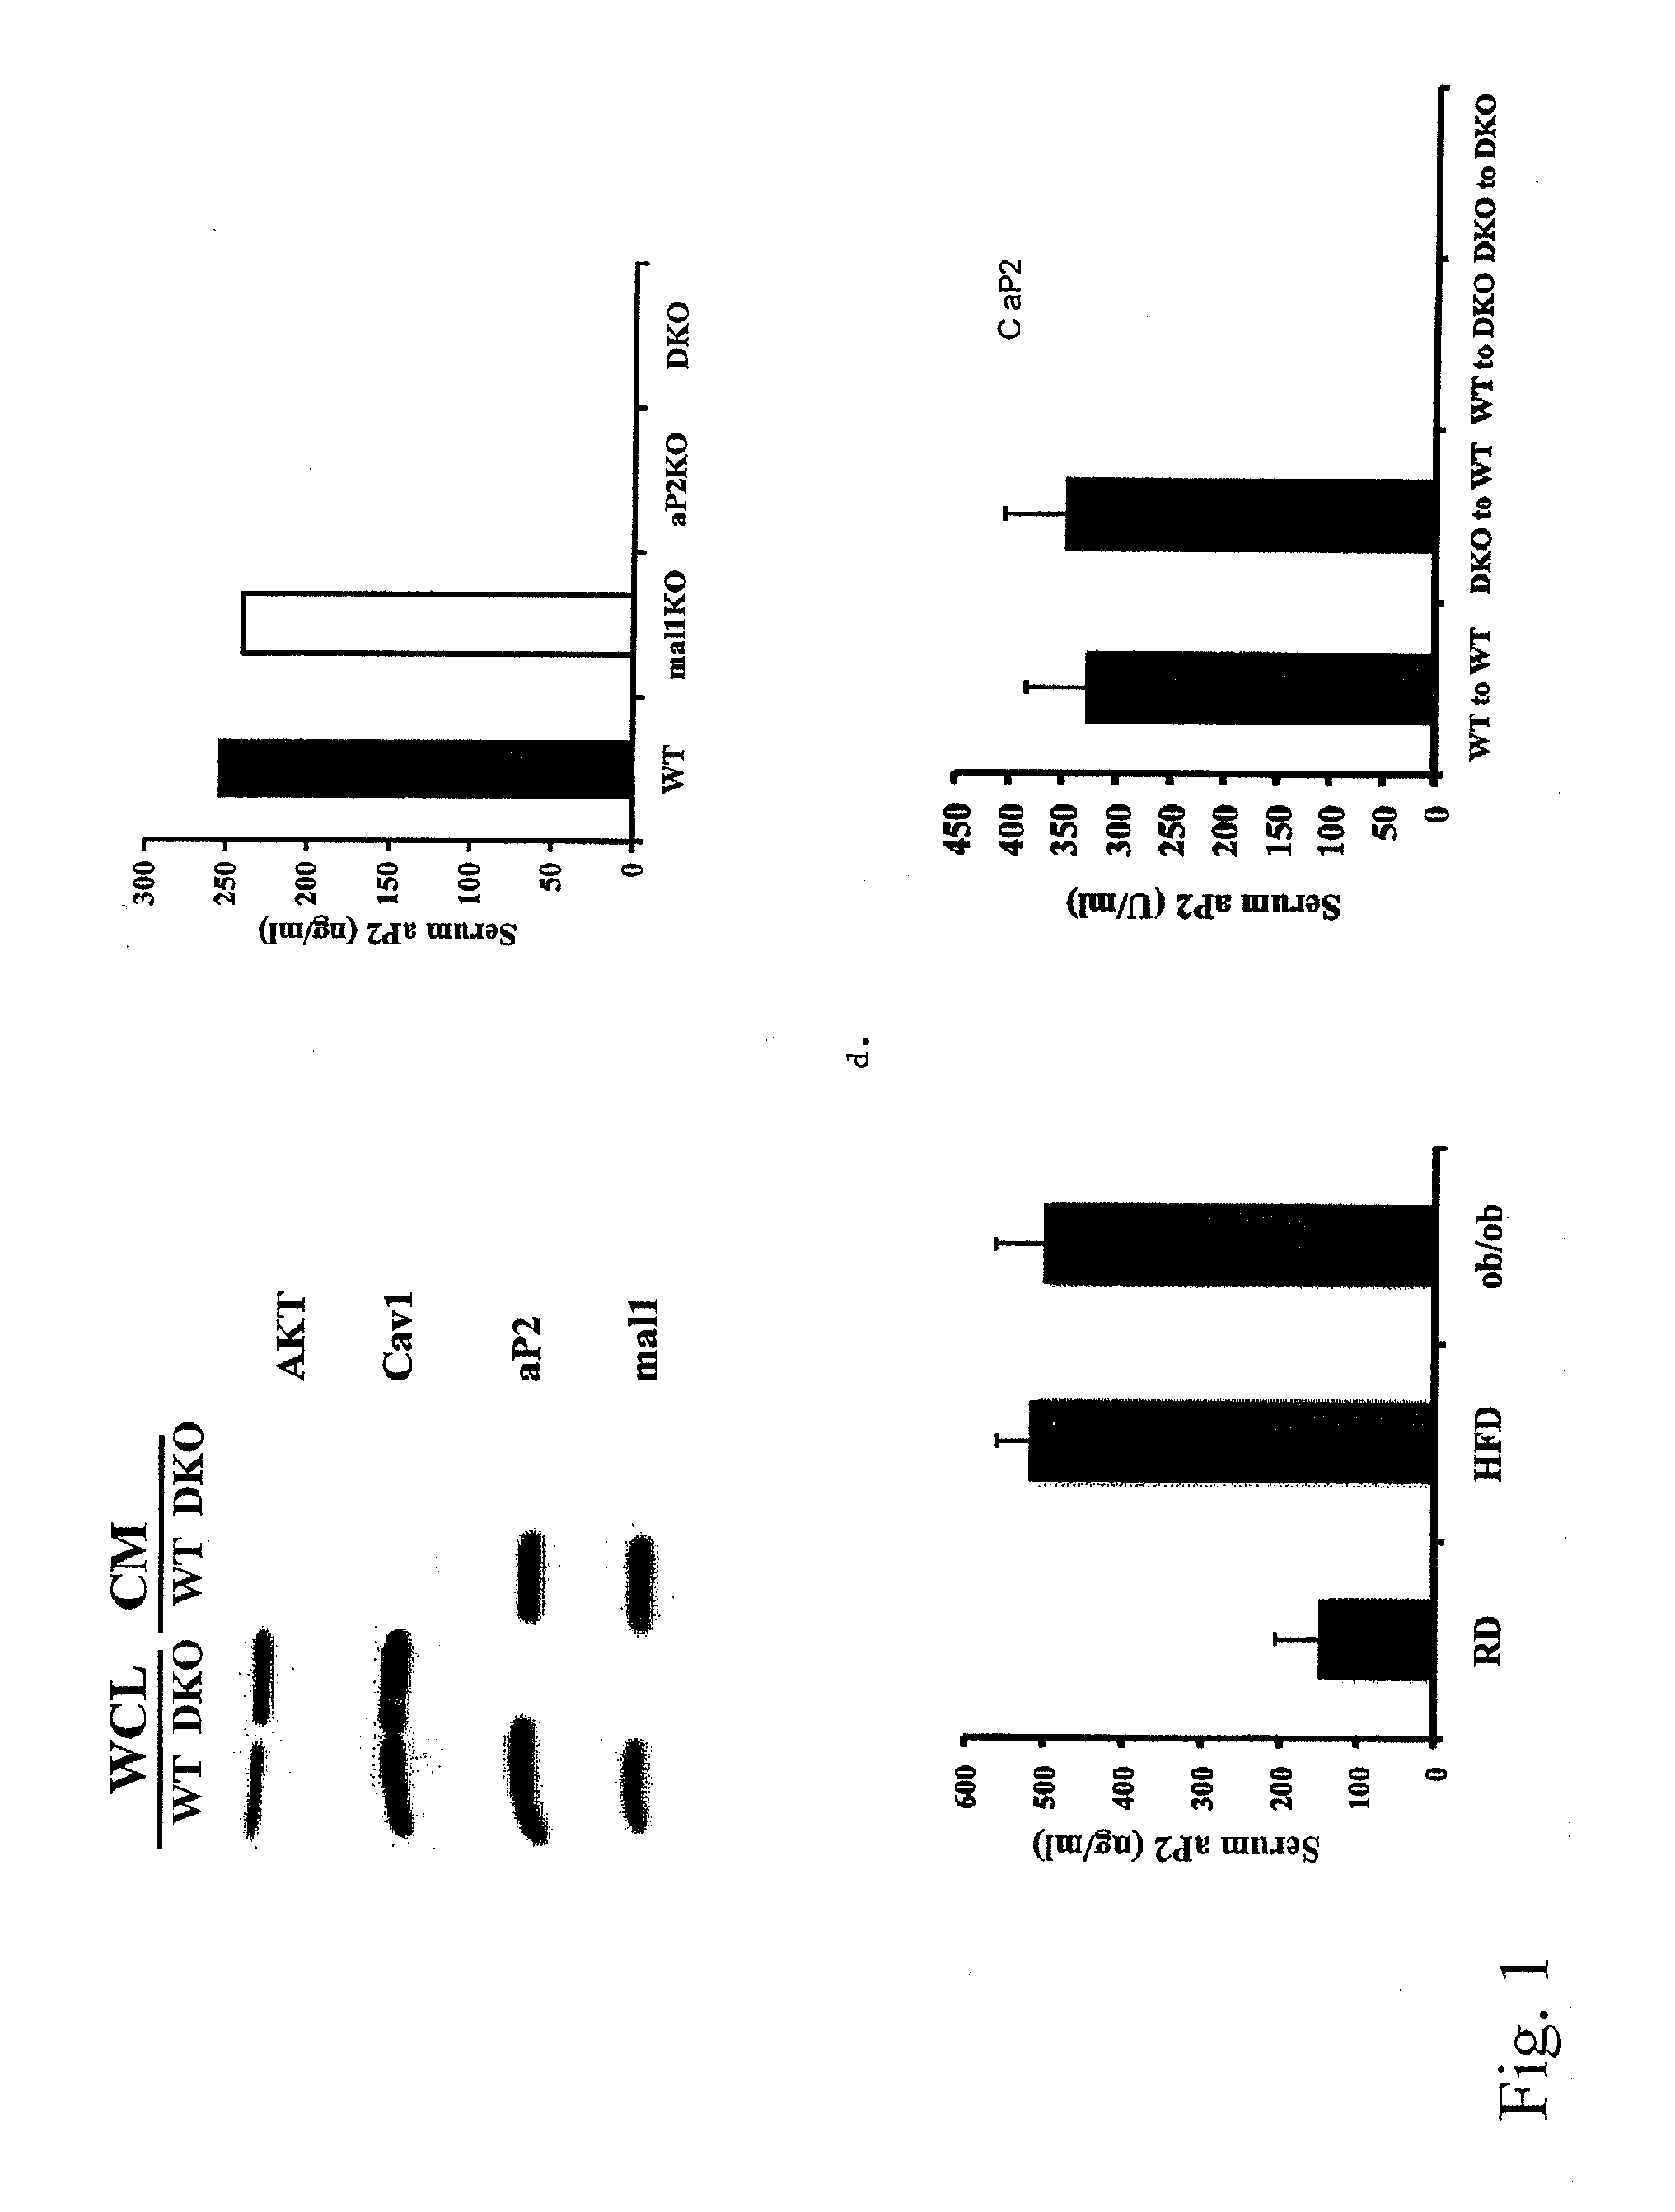 Secreted ap2 and methods of inhibiting same